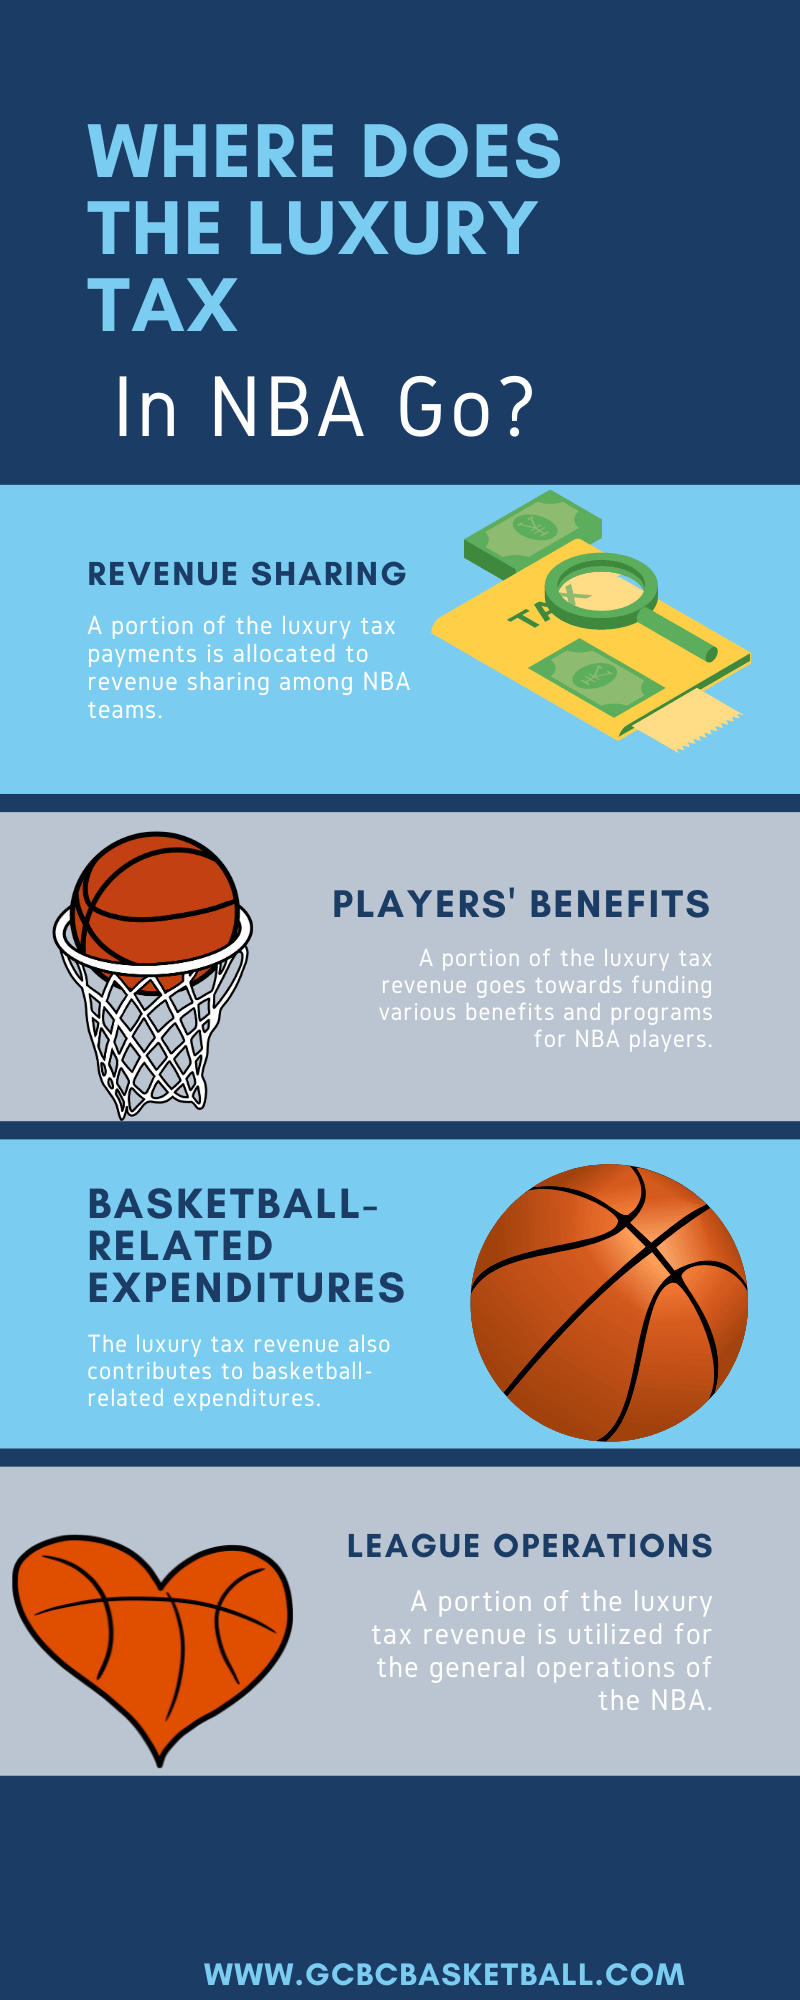 Where Does The Luxury Tax In NBA Go?